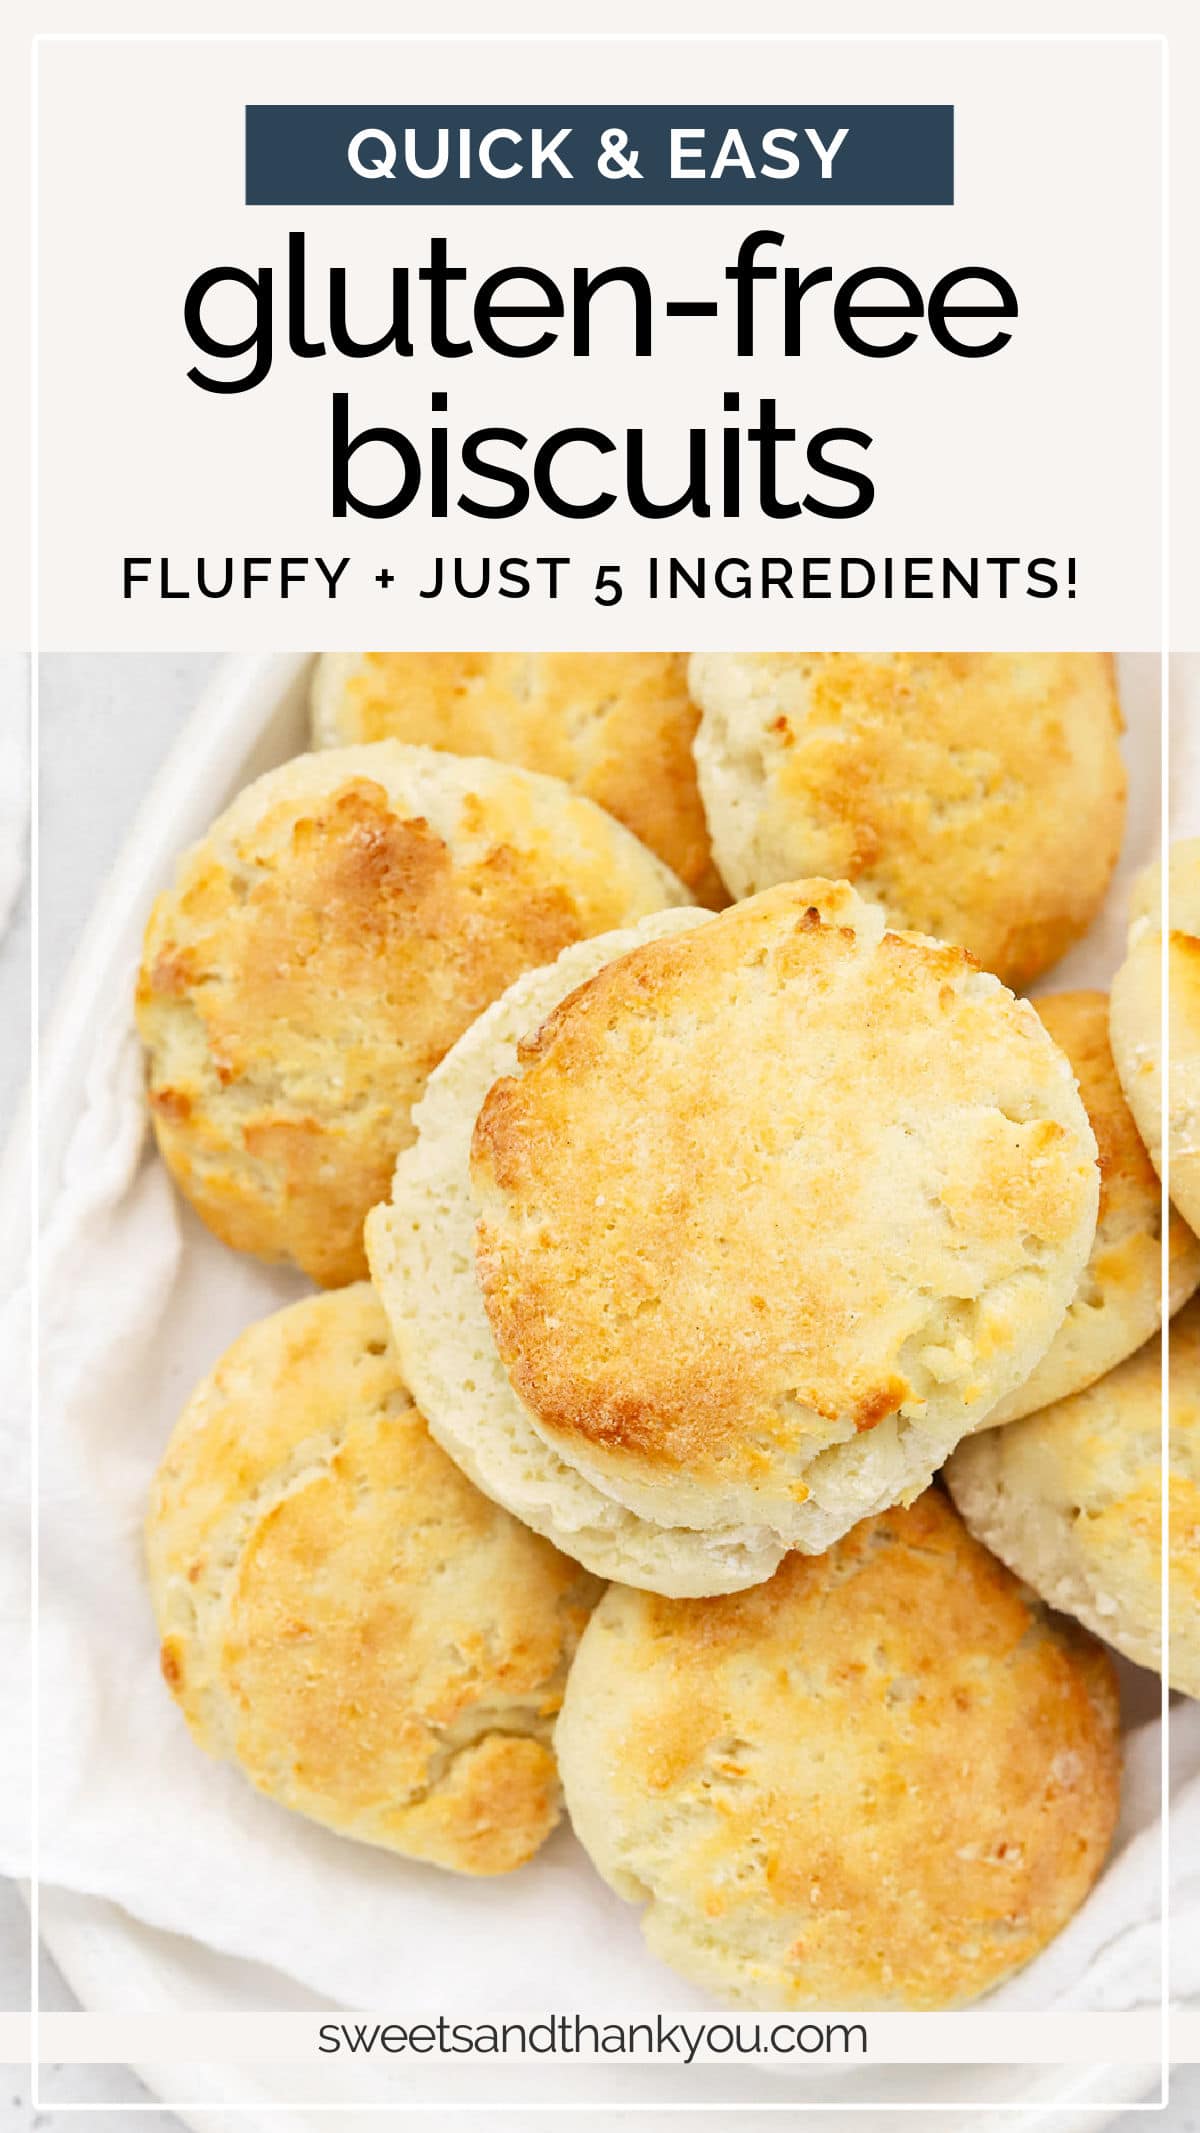 Quick & Easy Gluten-Free Biscuits - These 5-ingredient gluten-free biscuits are simple enough for beginners and are on the table in no time! // Yogurt Biscuits // Gluten Free Drop Biscuits // Easy Gluten Free Biscuit Recipe #biscuits #glutenfree #glutenfreebaking #dropbiscuits